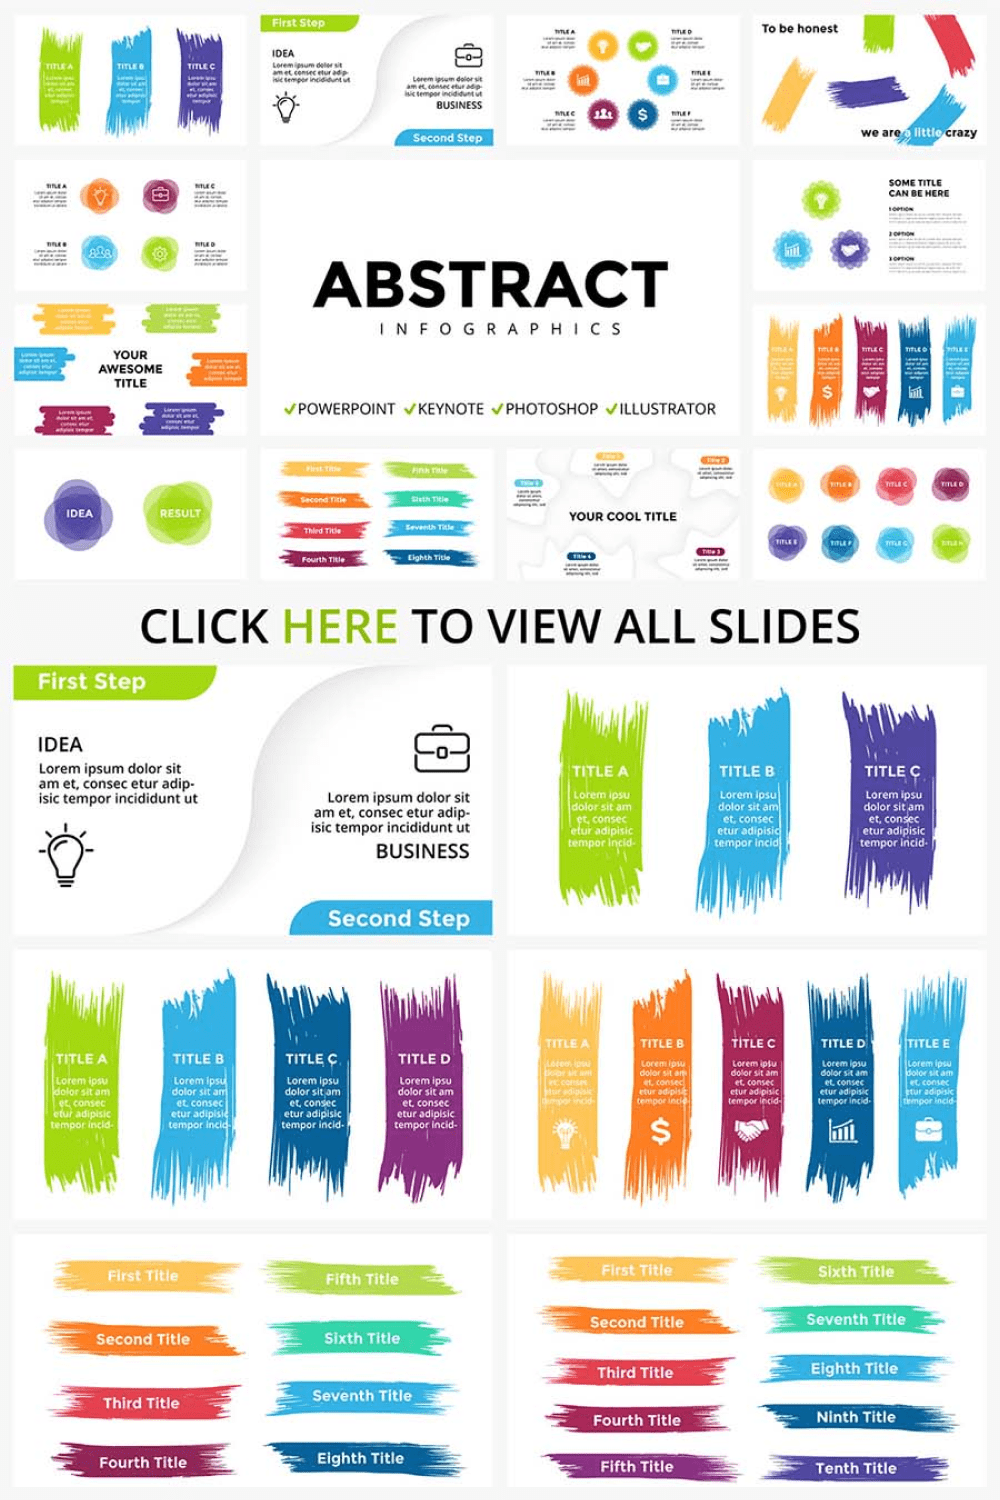 15 Abstract Infographic Templates – 5 ONLY